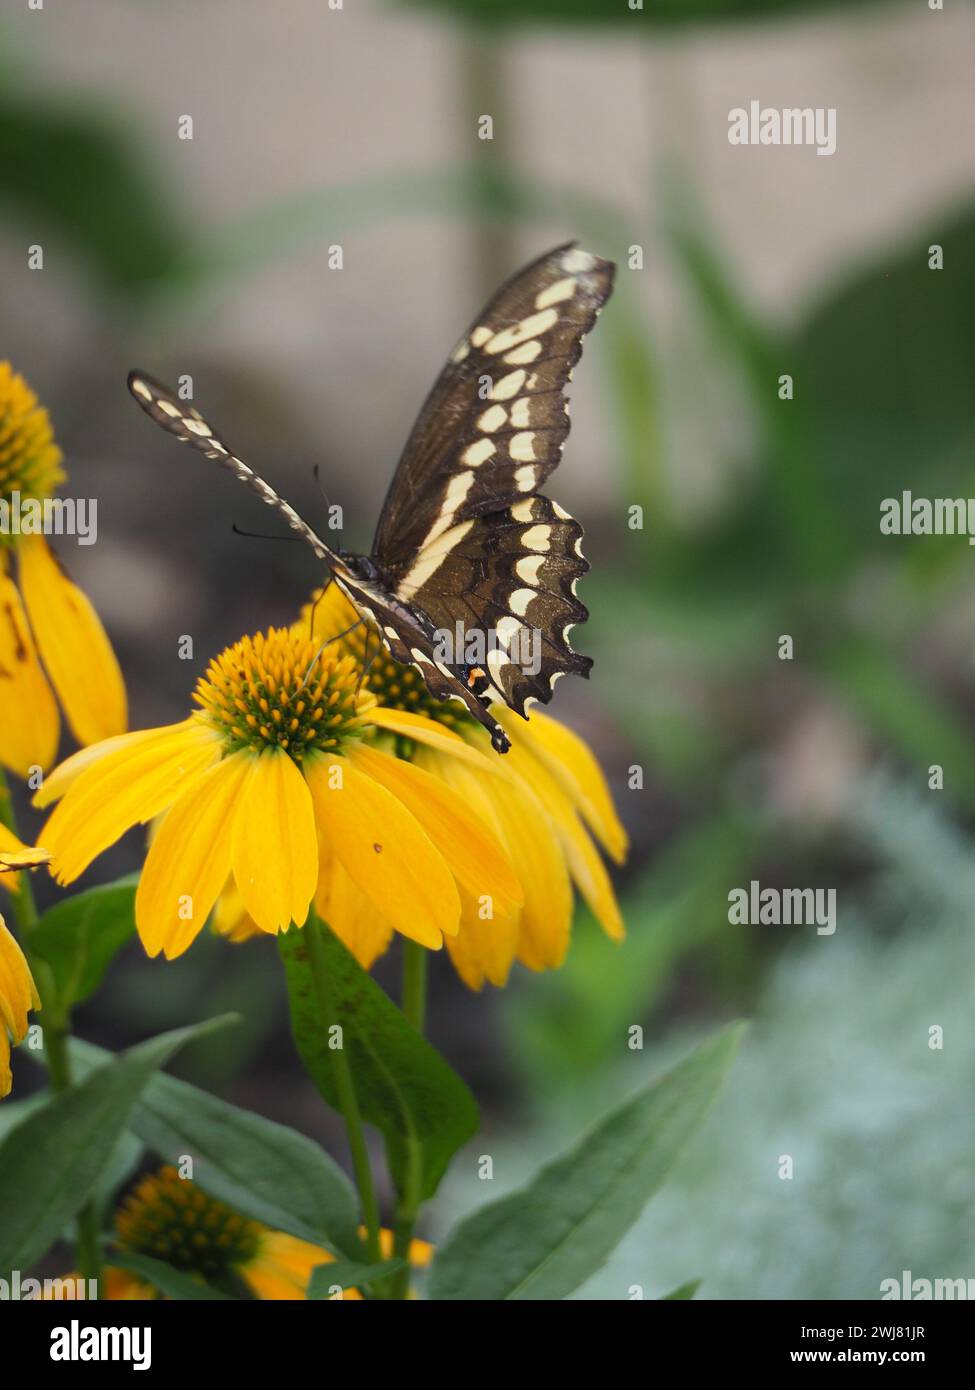 Brown and black butterfly resting on vibrant yellow flowers, appearing to be in mid-flight Stock Photo